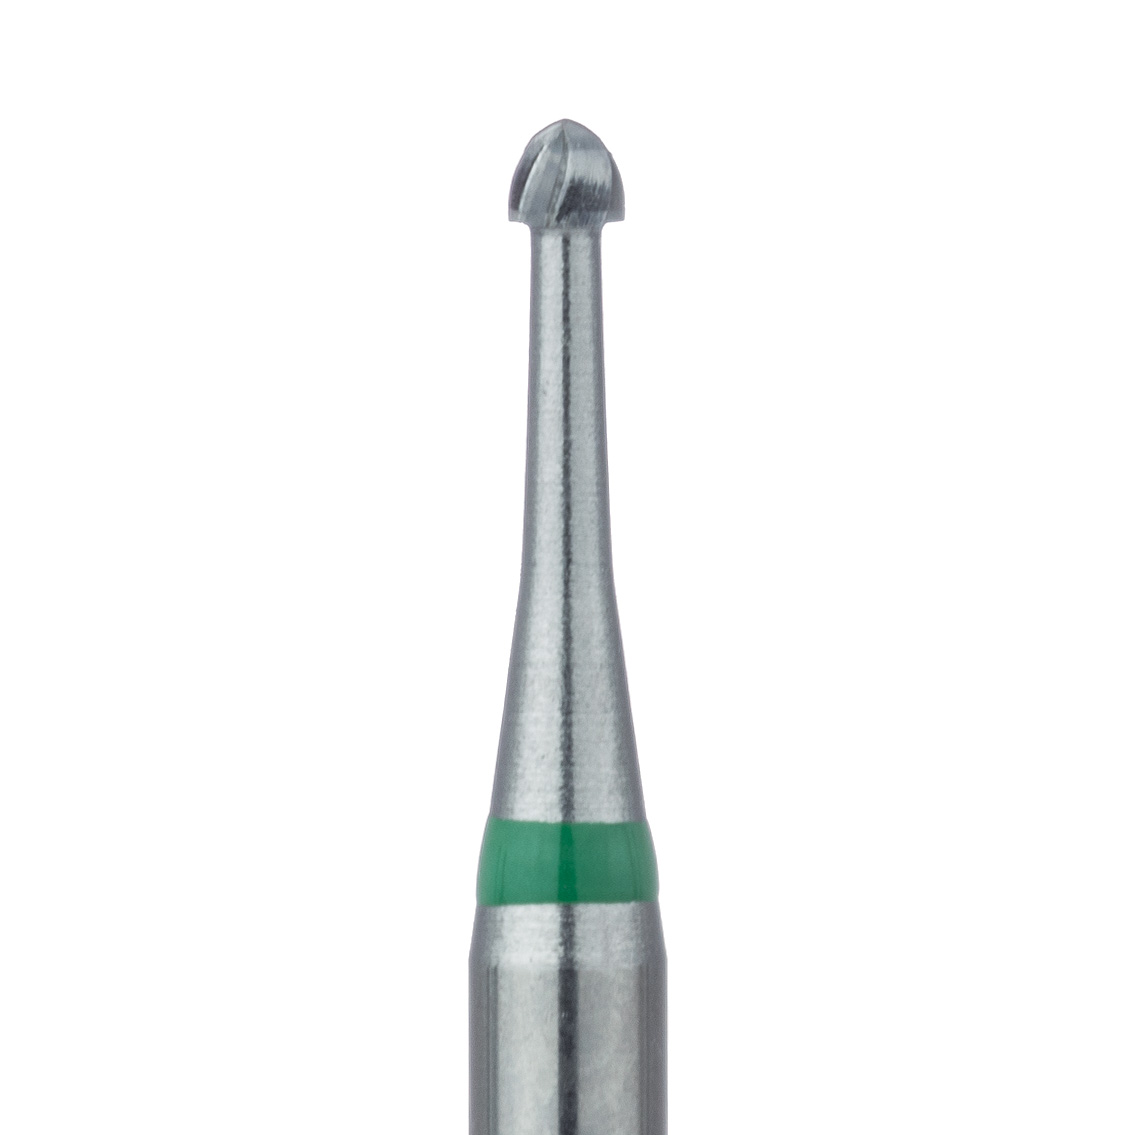 HM1S-014-RAL Operative Carbide Bur, Special Fluting Round, US#4S, 1.4mm Ø, RAL